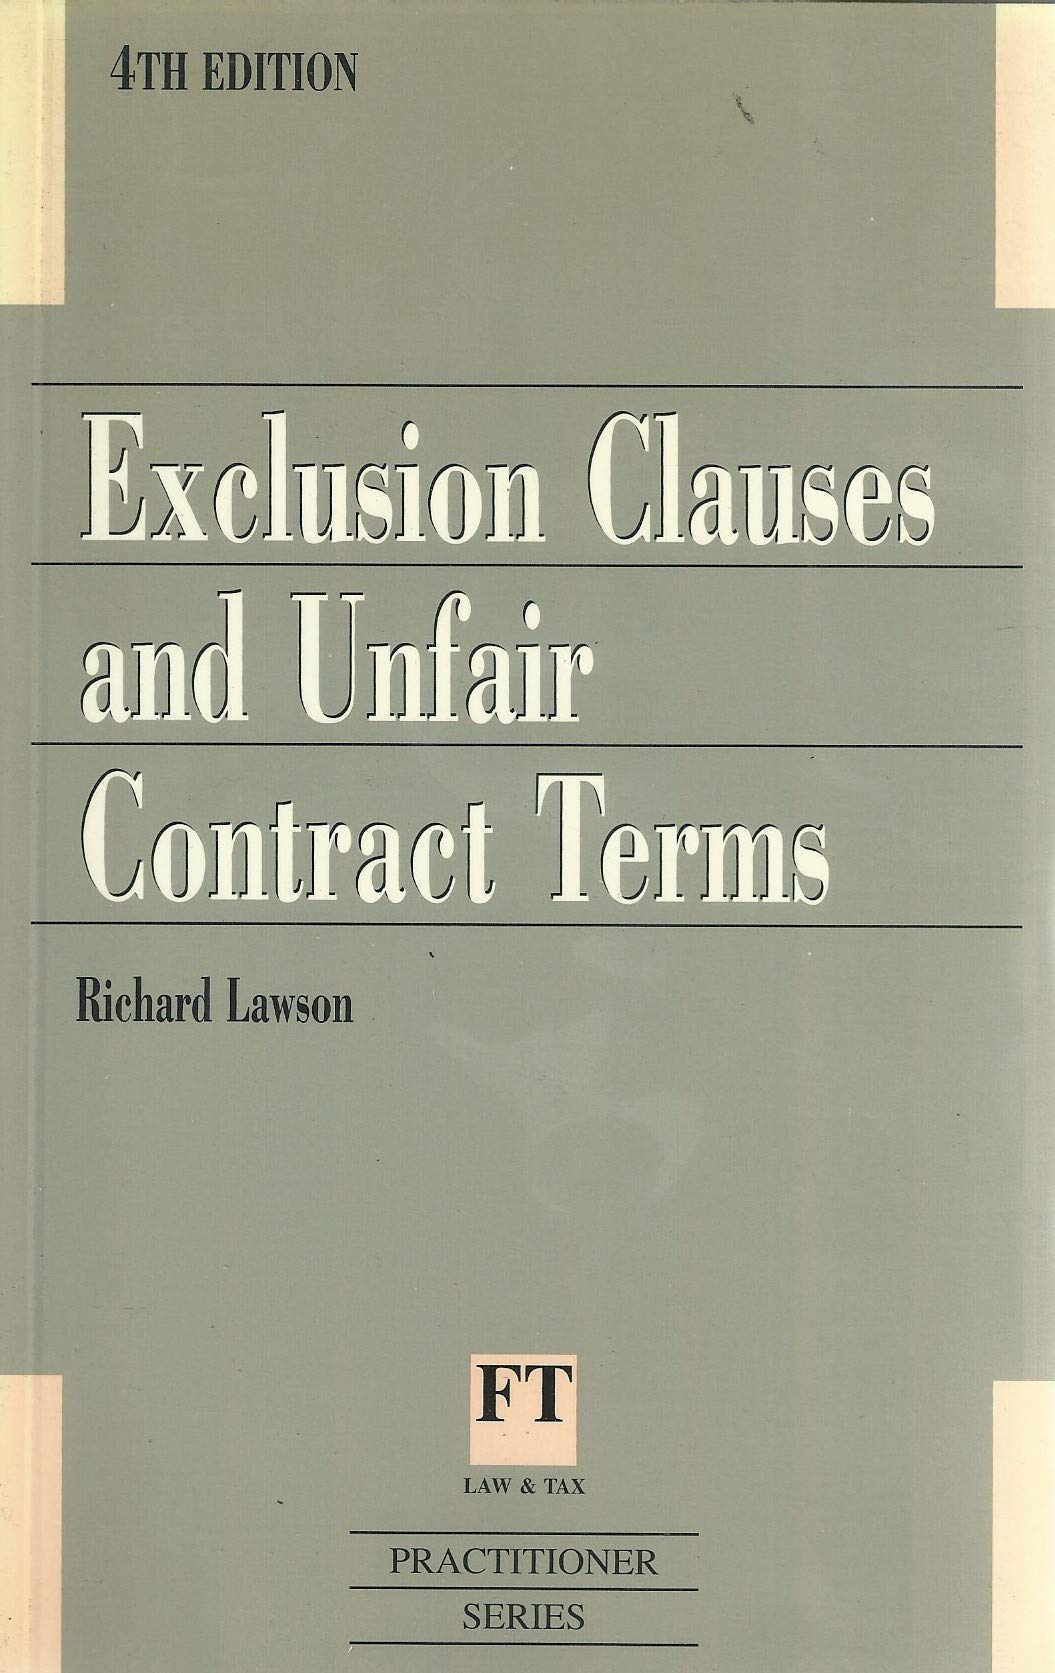 Exclusion Clauses and Unfair Contract Terms (Longman Practitioner Series)